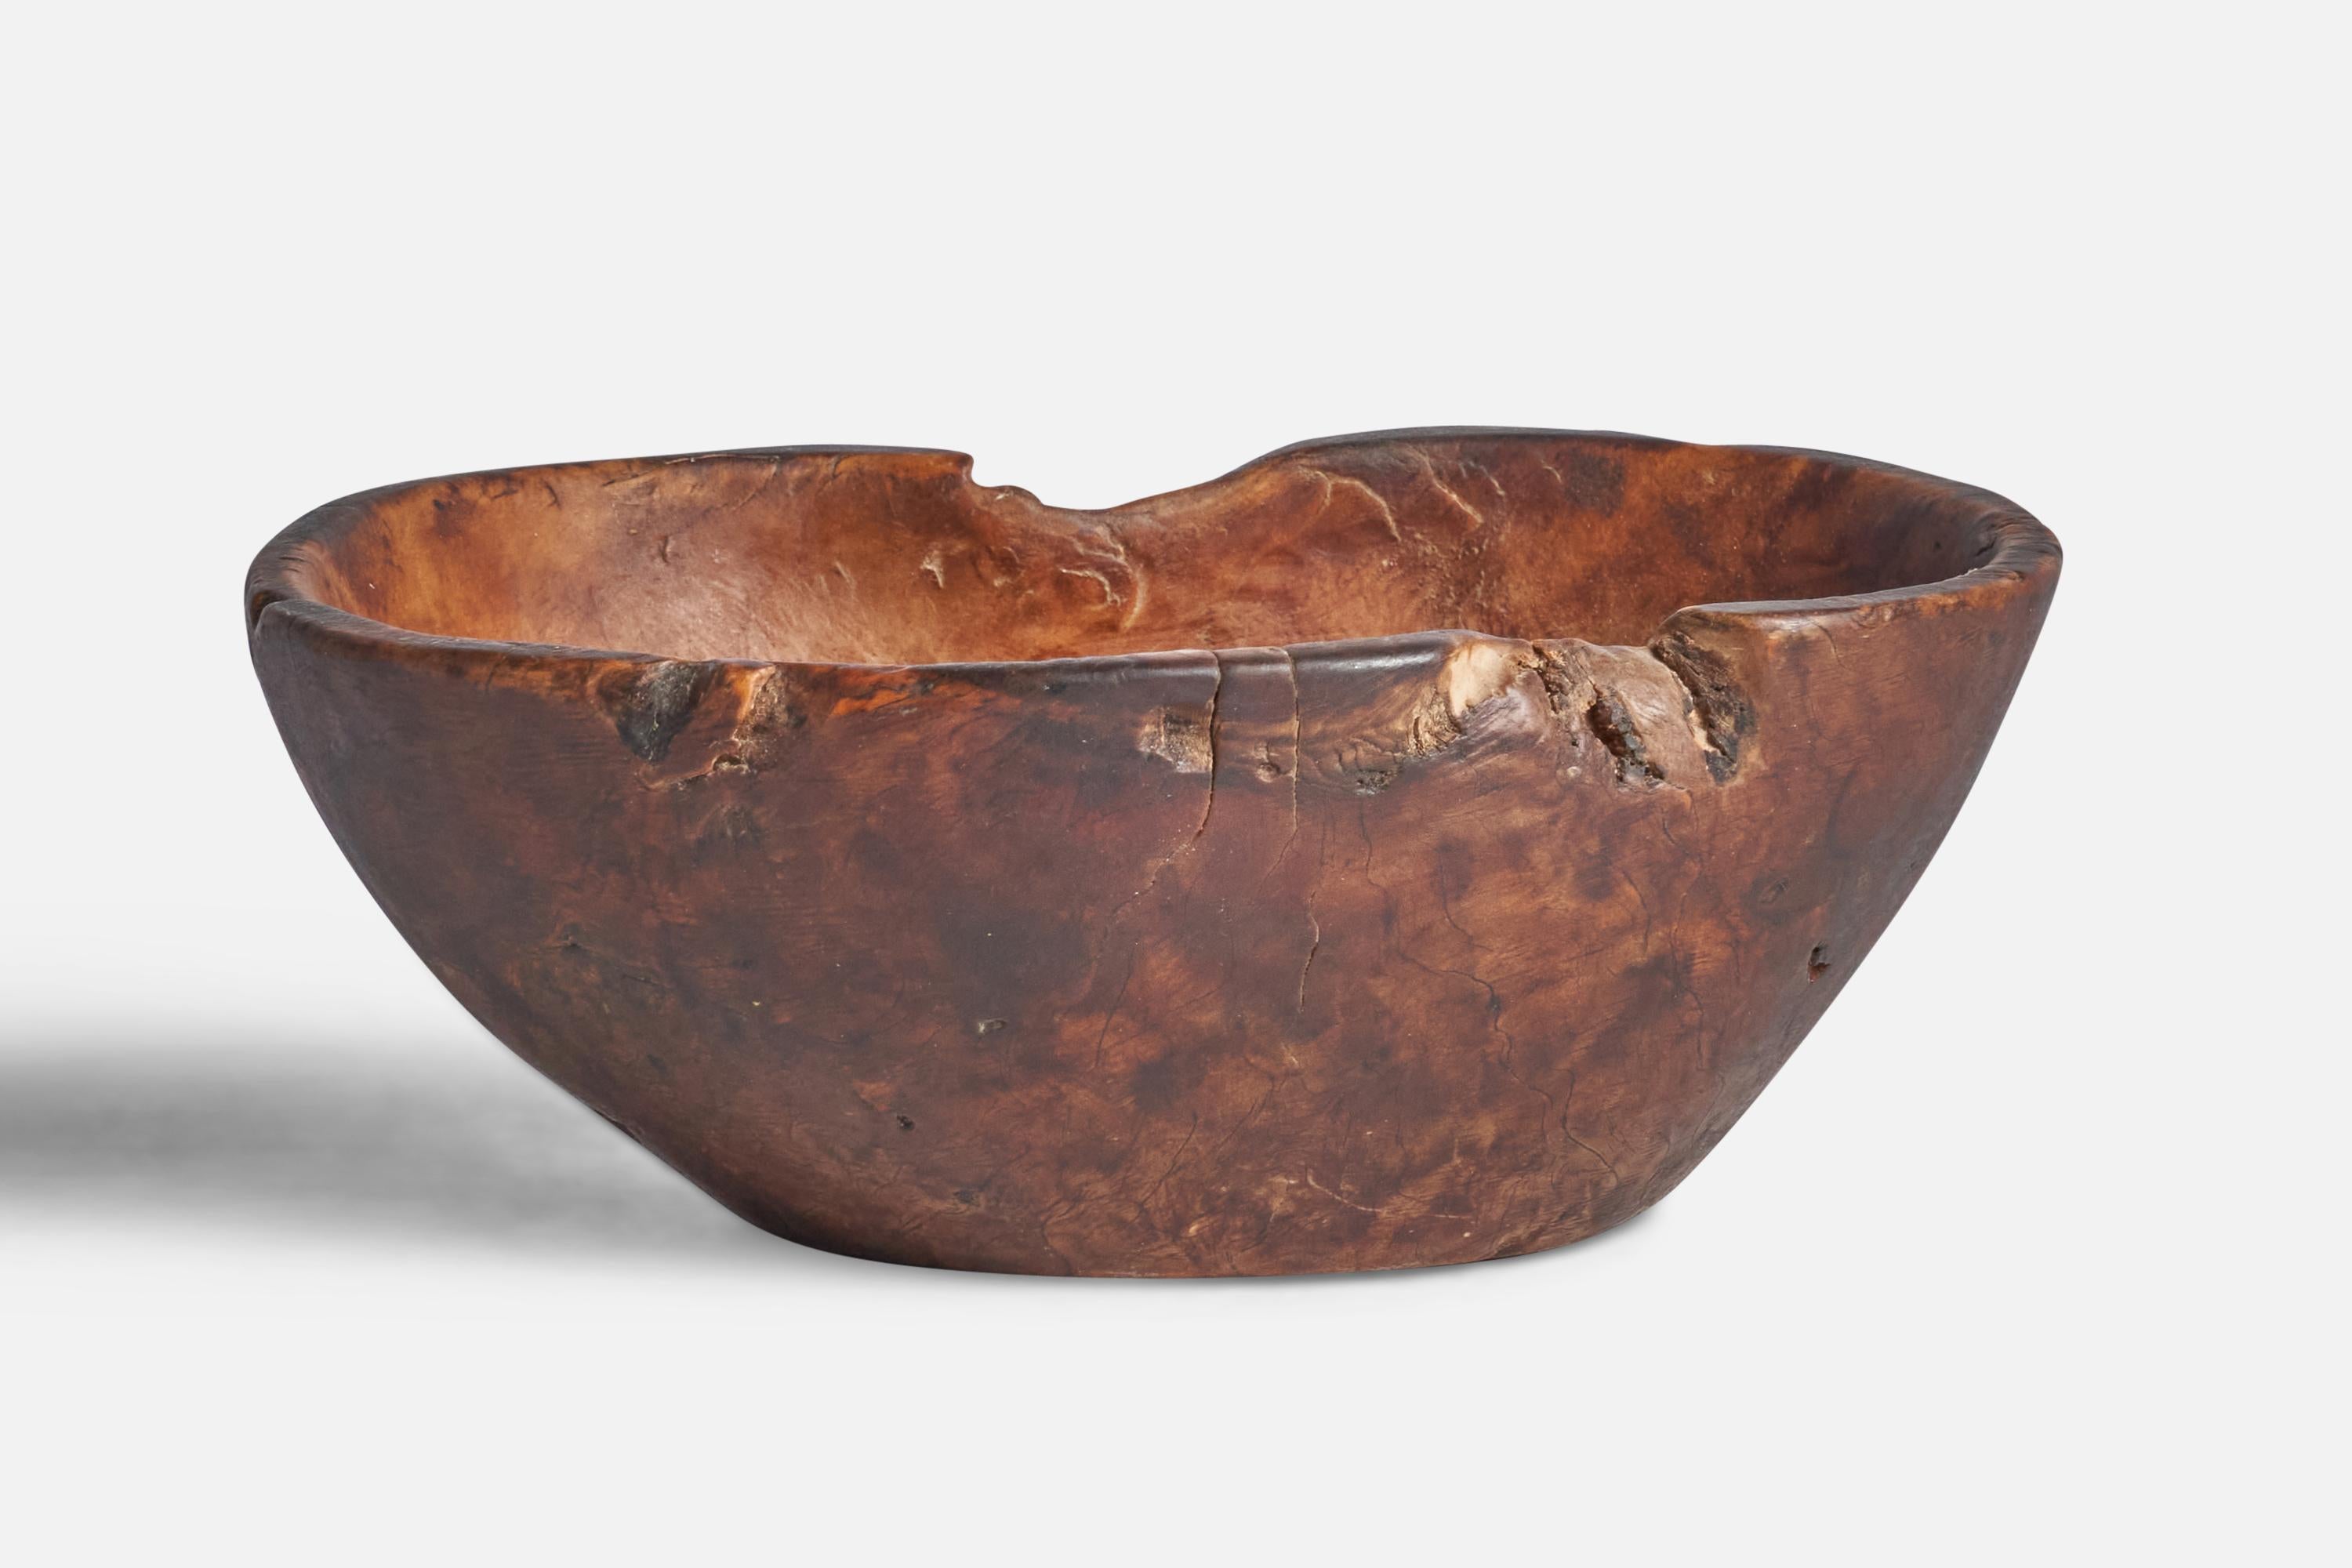 A burl wood bowl produced in Sweden, 19th century.